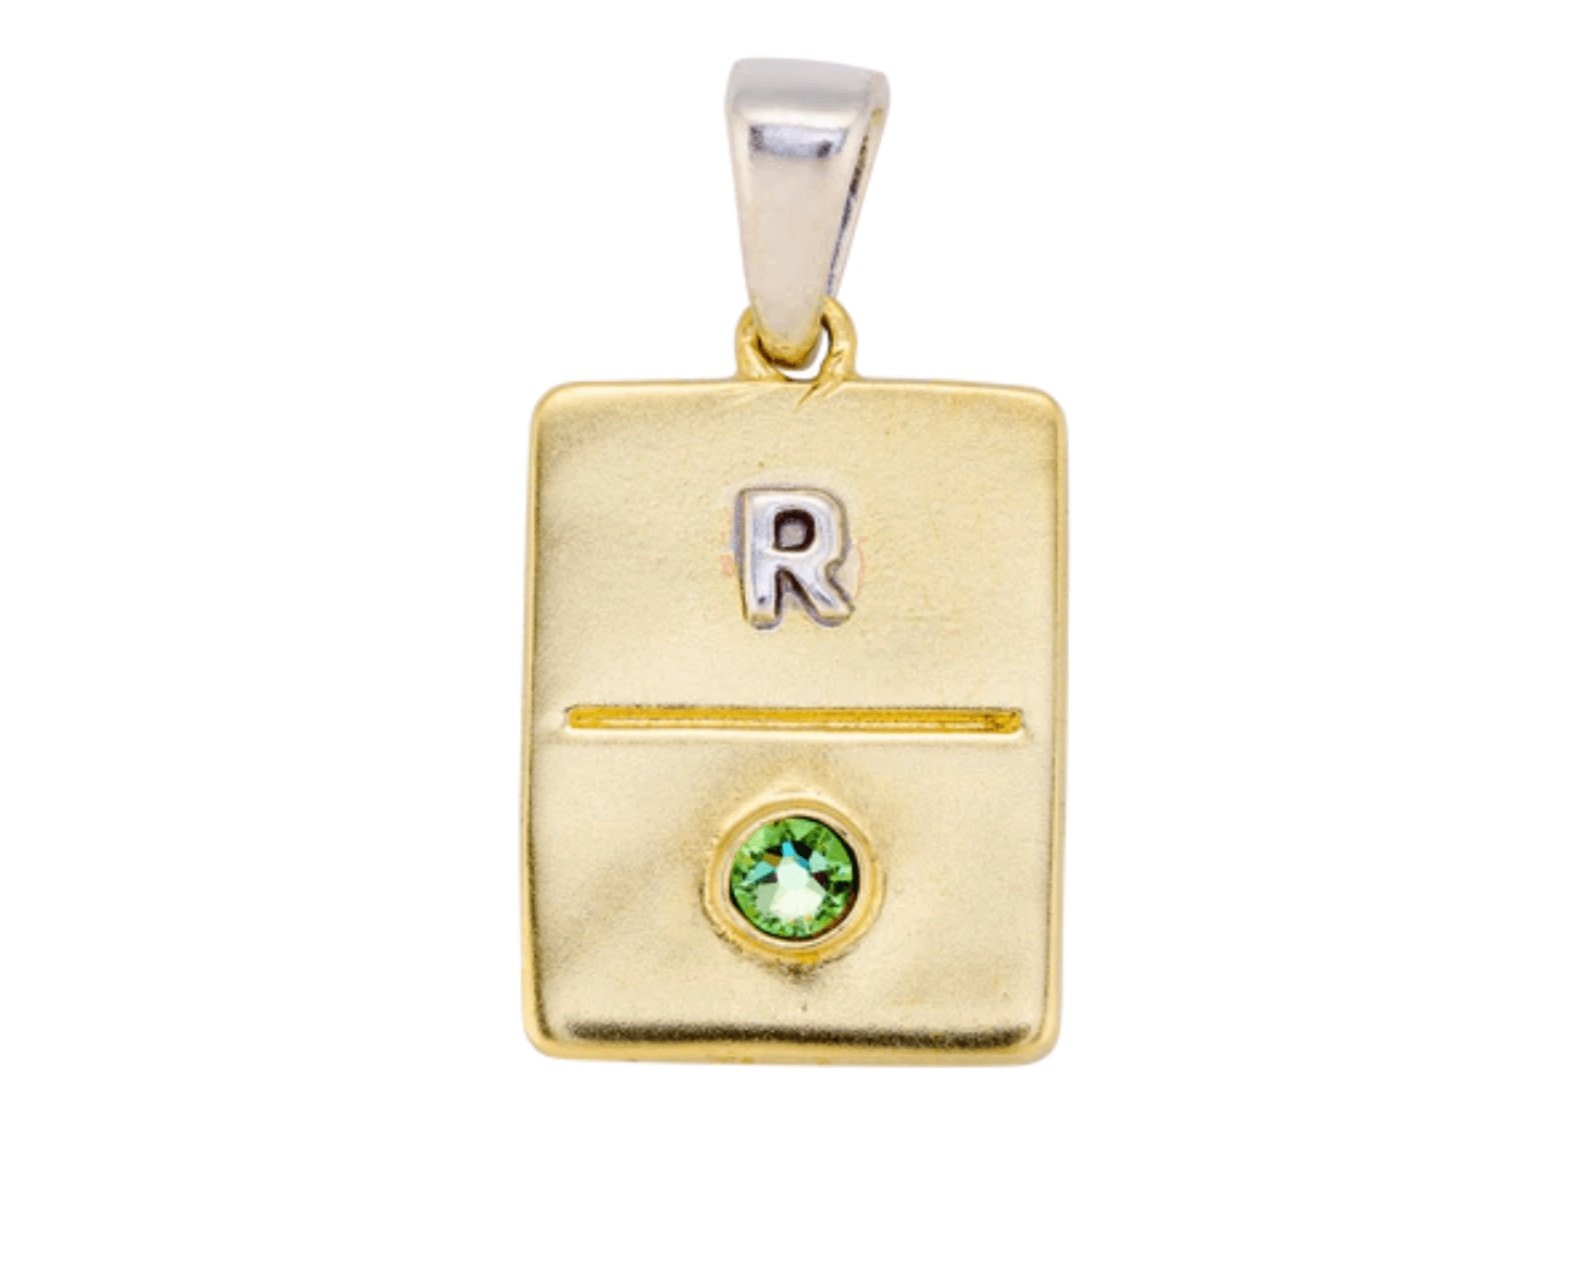 Twofold Tag Birthstone Pendant - August, $66 at Waxing Poetic